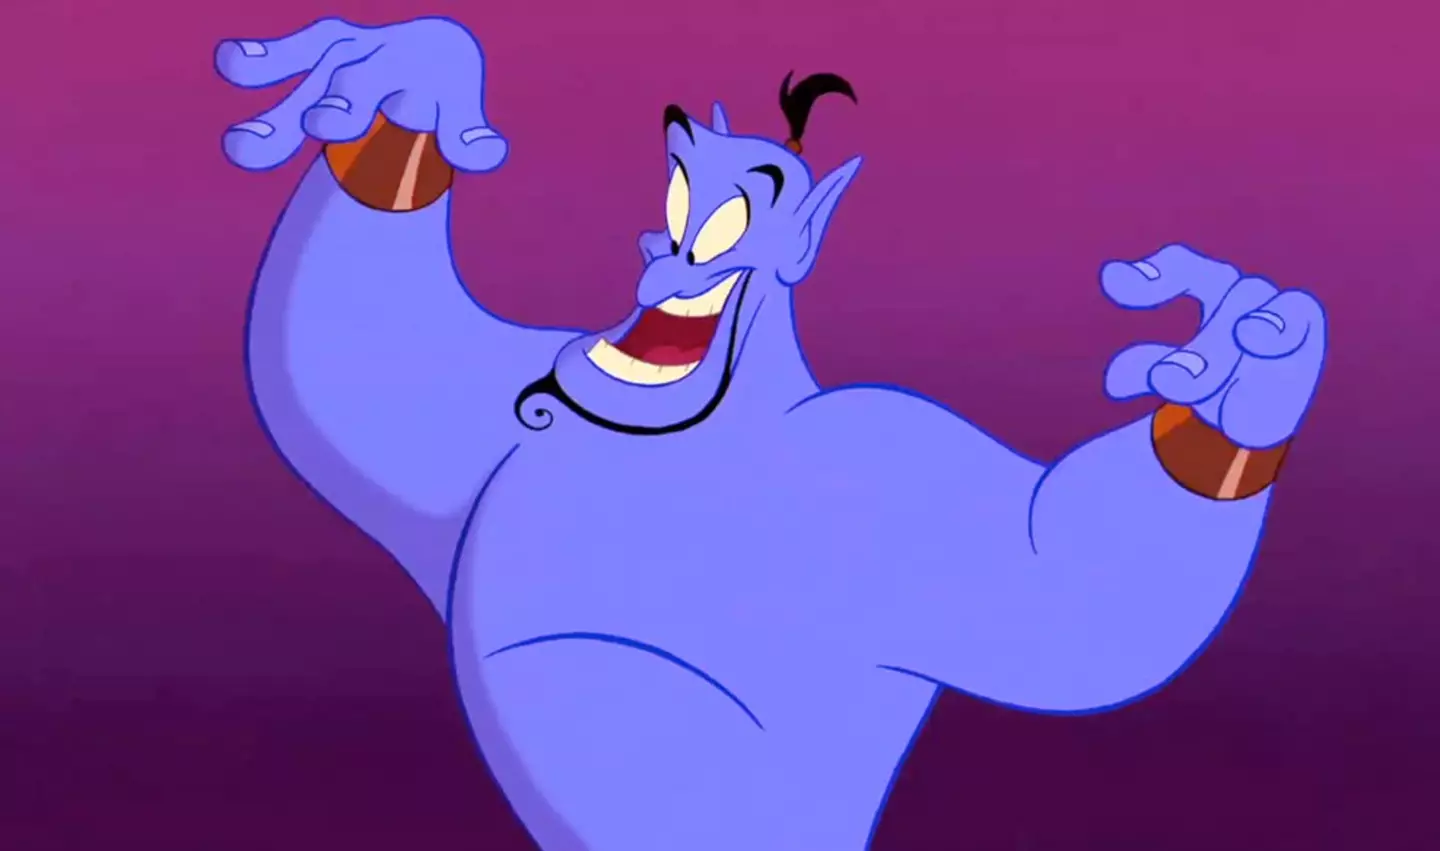 Robin Williams was only paid $75,000 instead of $8 million for his role as  Genie in Aladdin